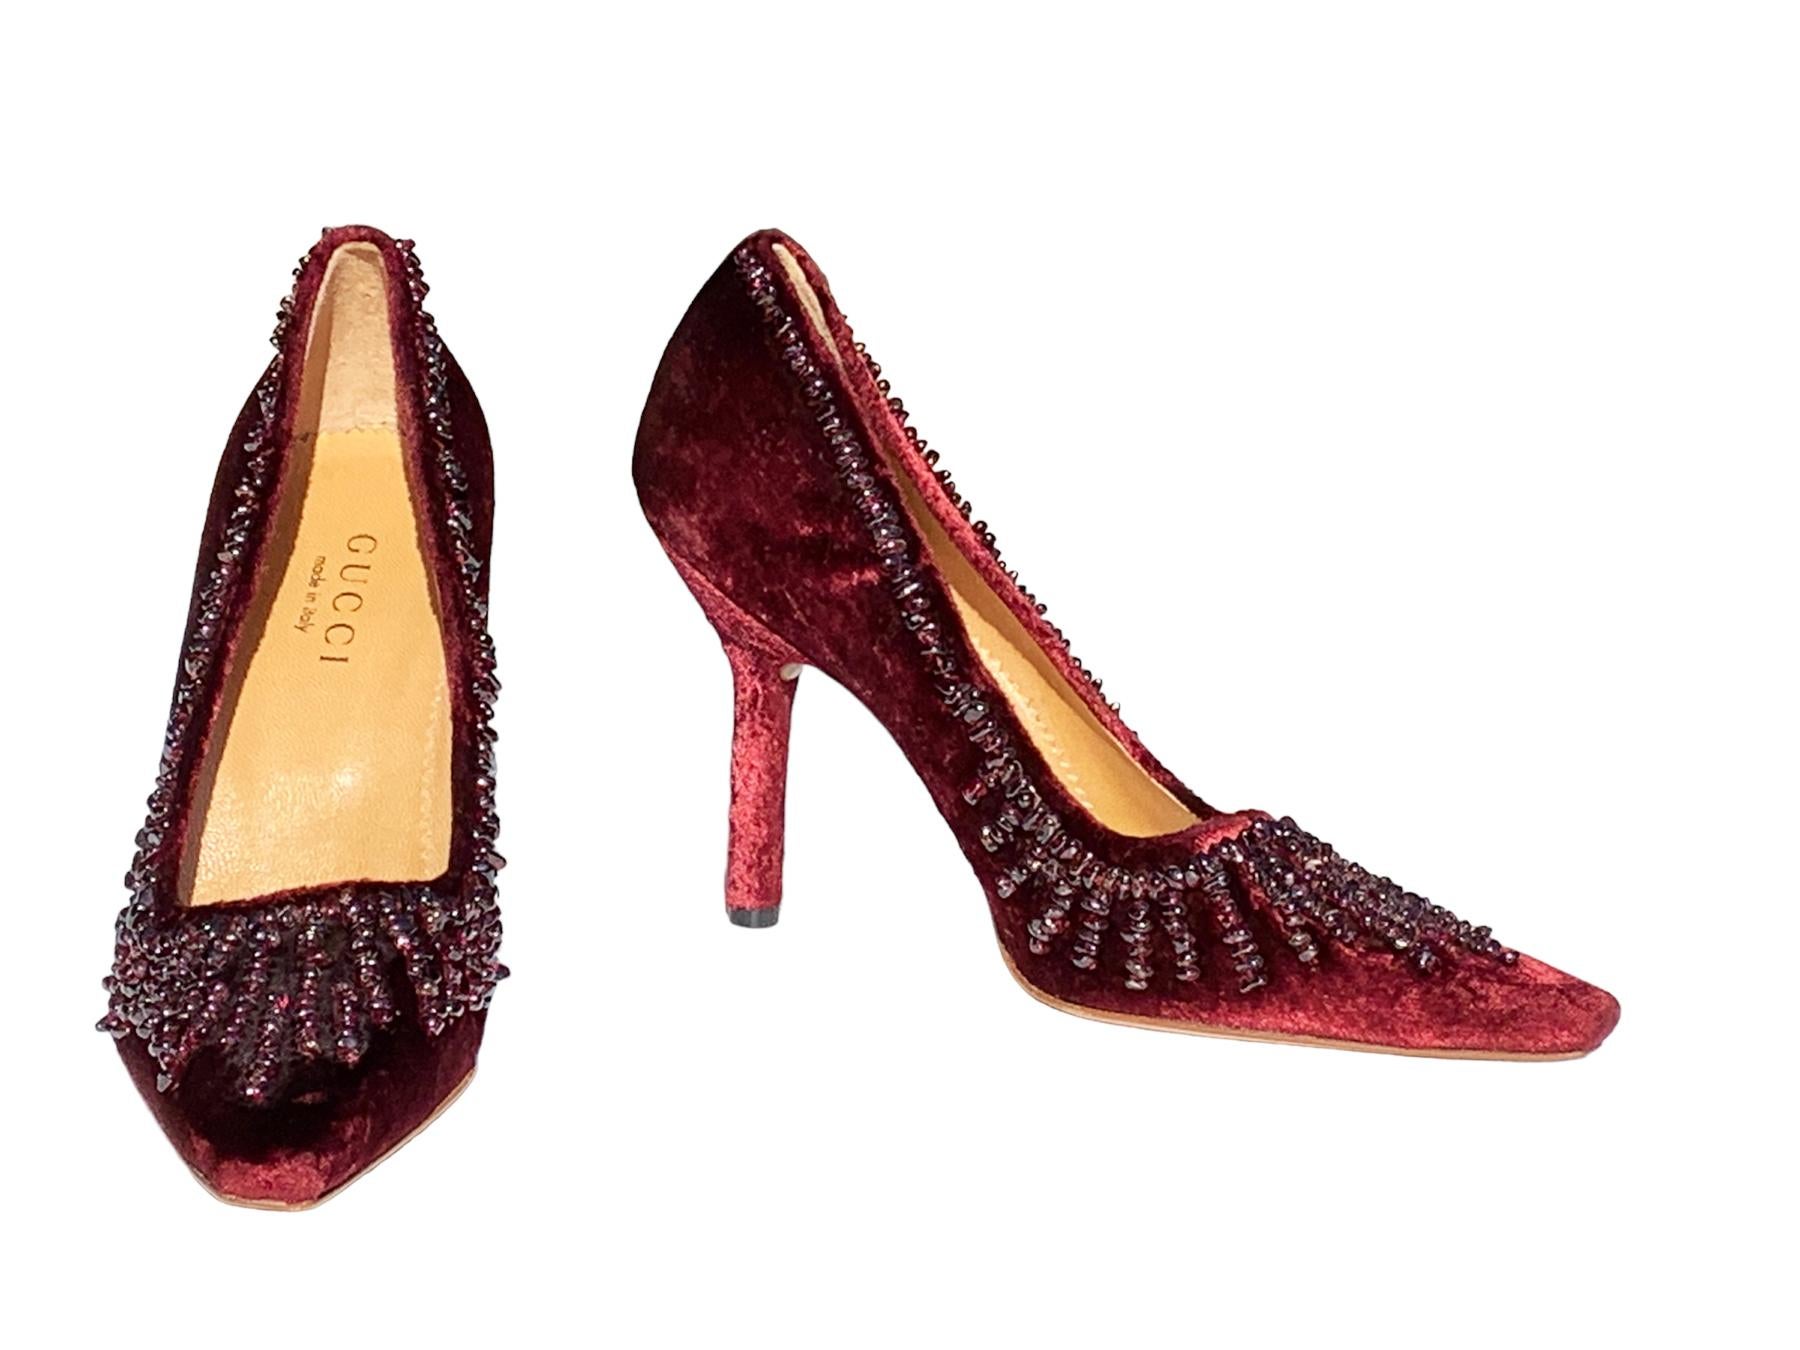 New Tom Ford for Gucci Burgundy Velvet Onyx Embellished Shoes Pumps
S/S 1999 Collection
Italian size 36.5 - US 6.5
Burgundy Velvet Upper, Burgundy Onyx Gemstone Embellishment, Leather Insole and Sole.
Heel Height - 3.75 inches ( 10 cm)
Made in